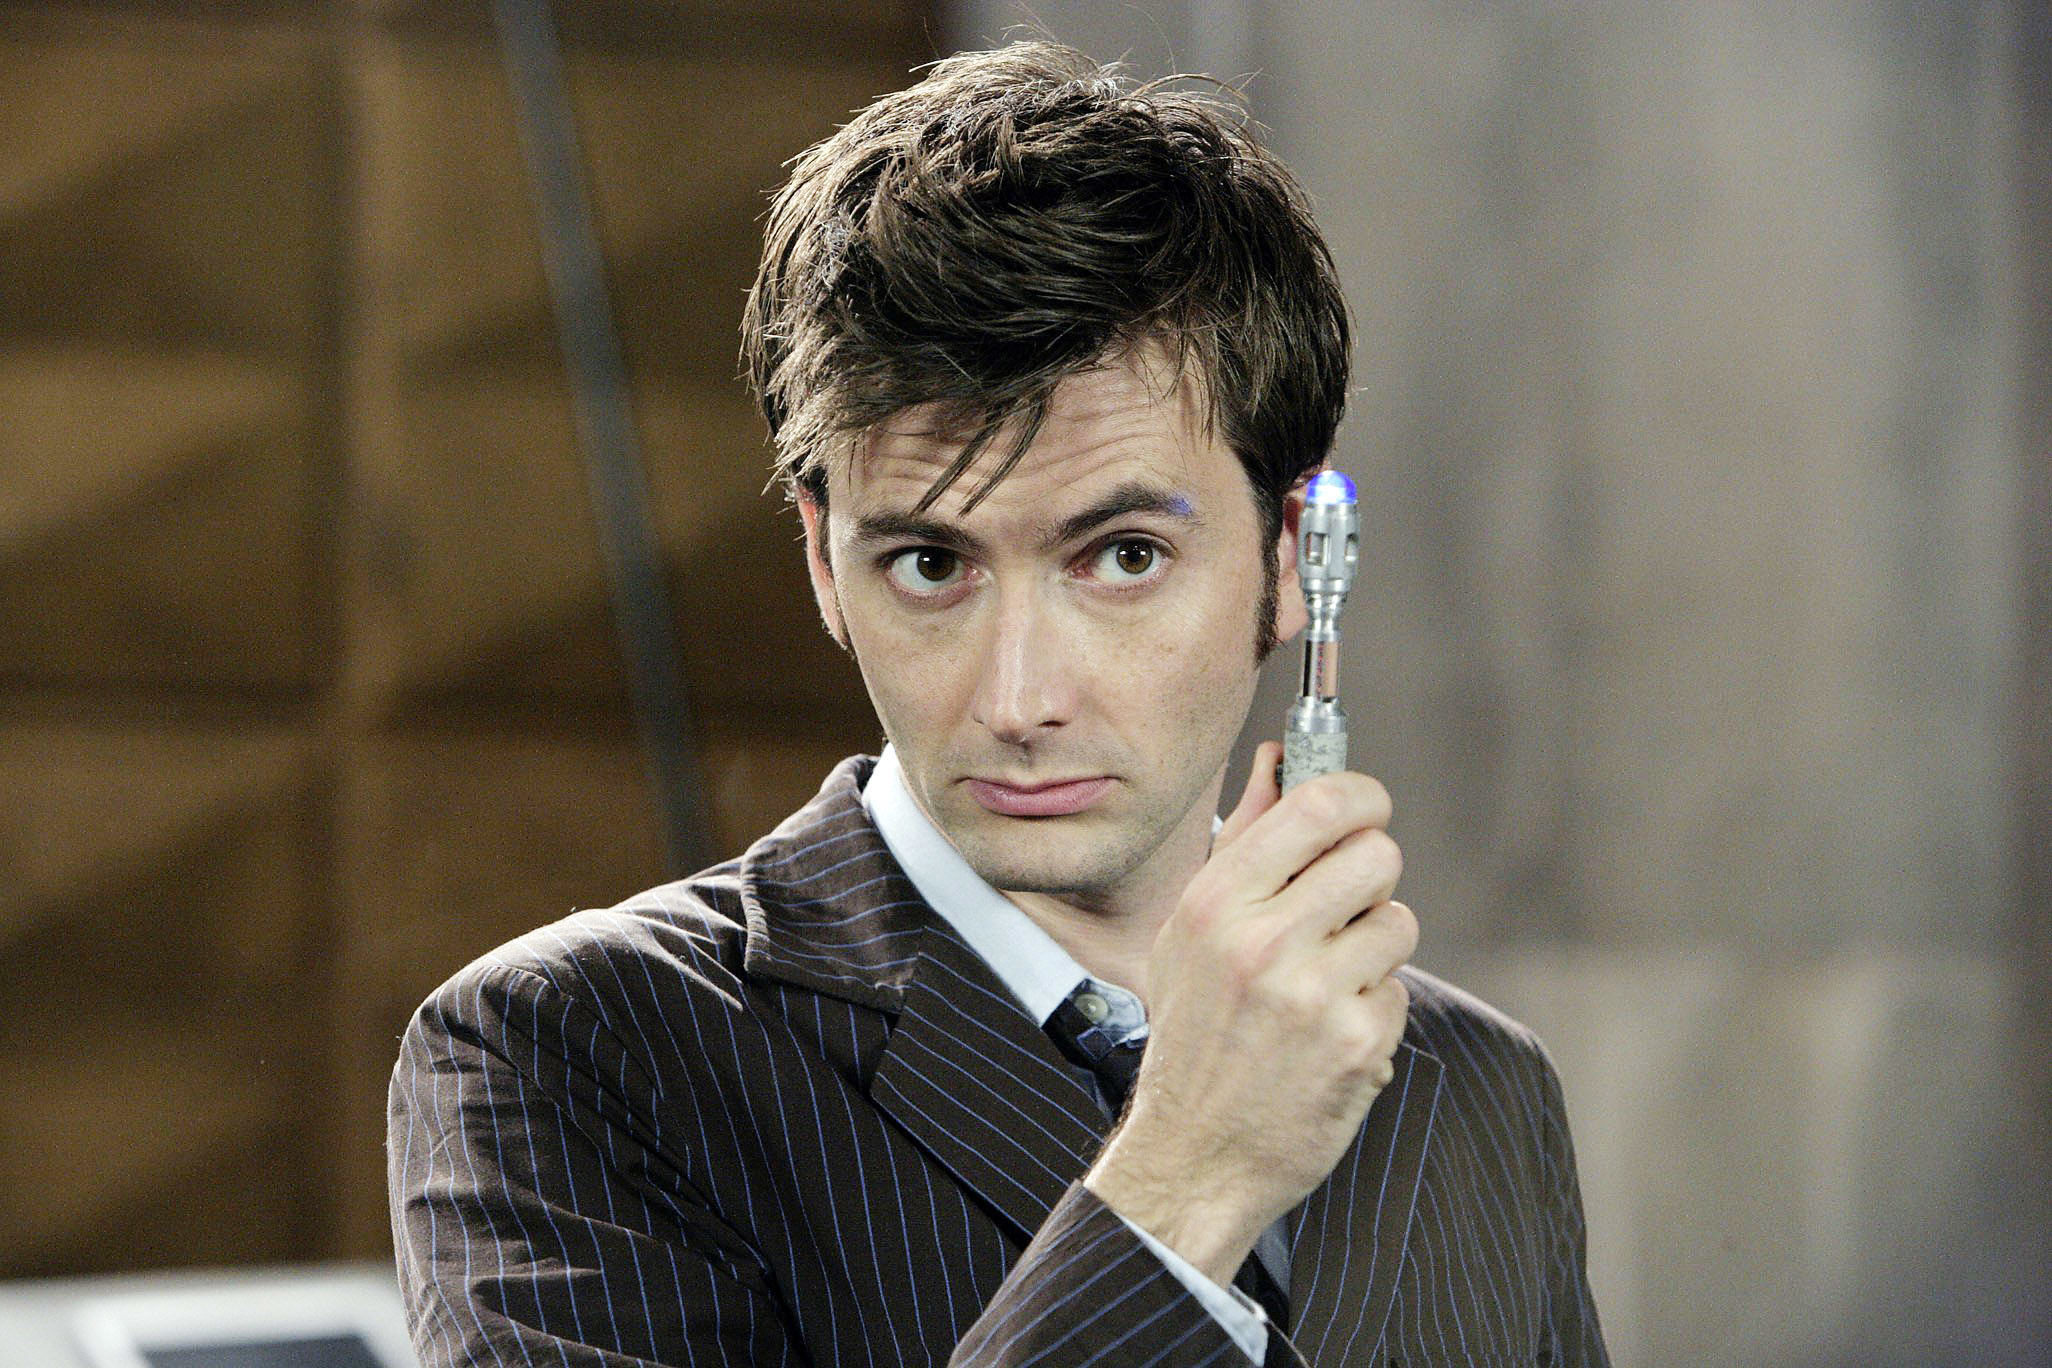 Tennant as the 10th Doctor, with his screwdriver